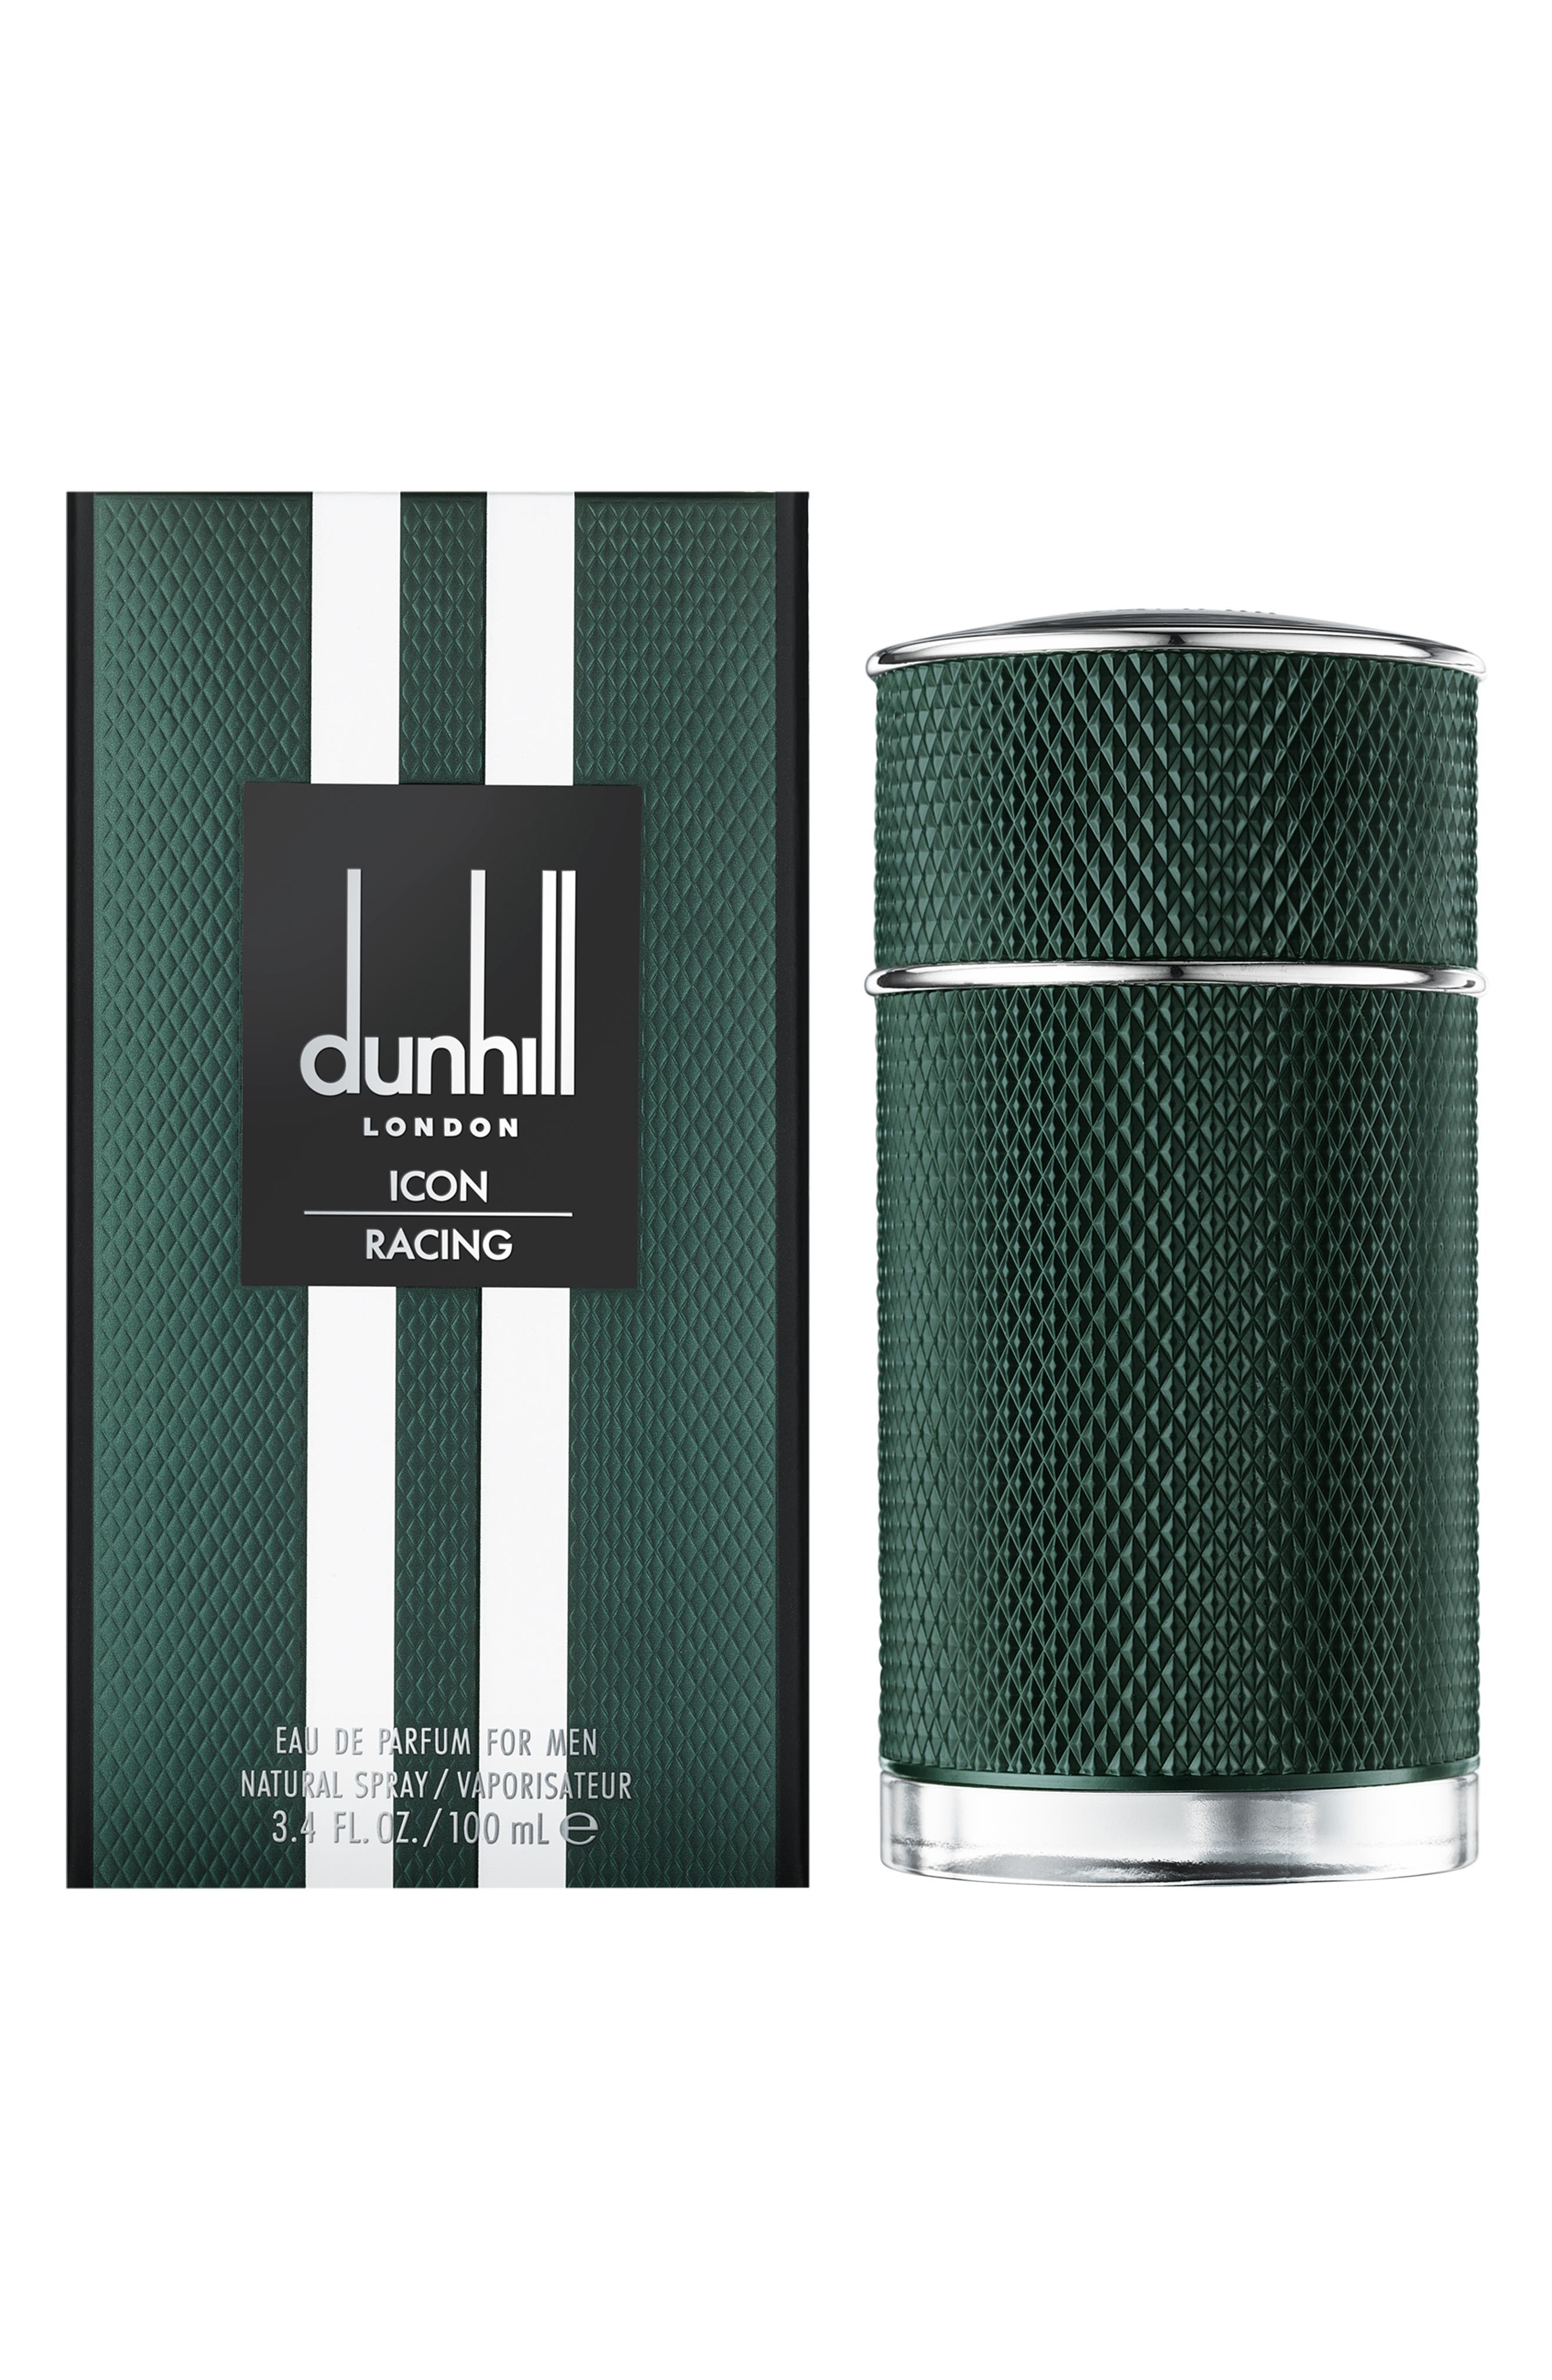 dunhill cologne